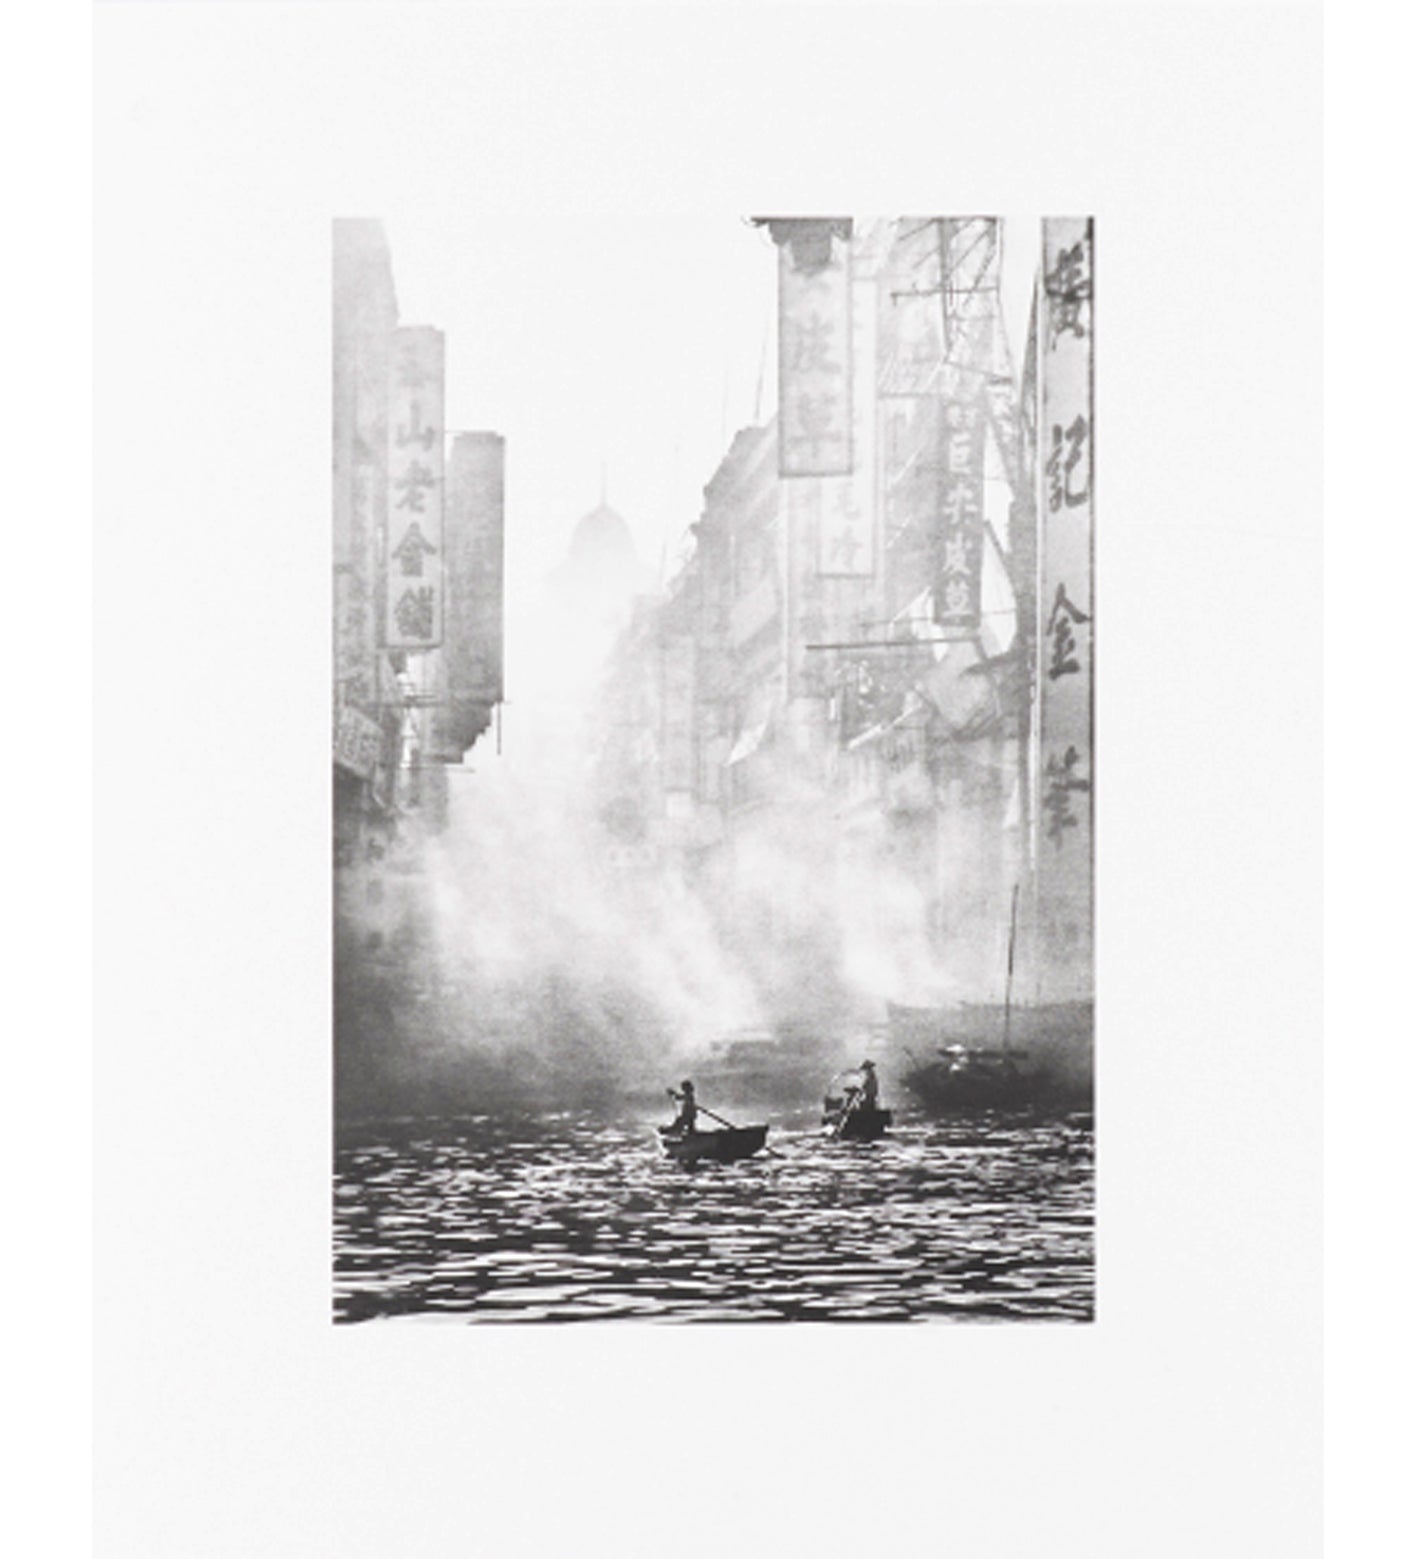 Fan Ho: Selected Works Collotype Portfolio